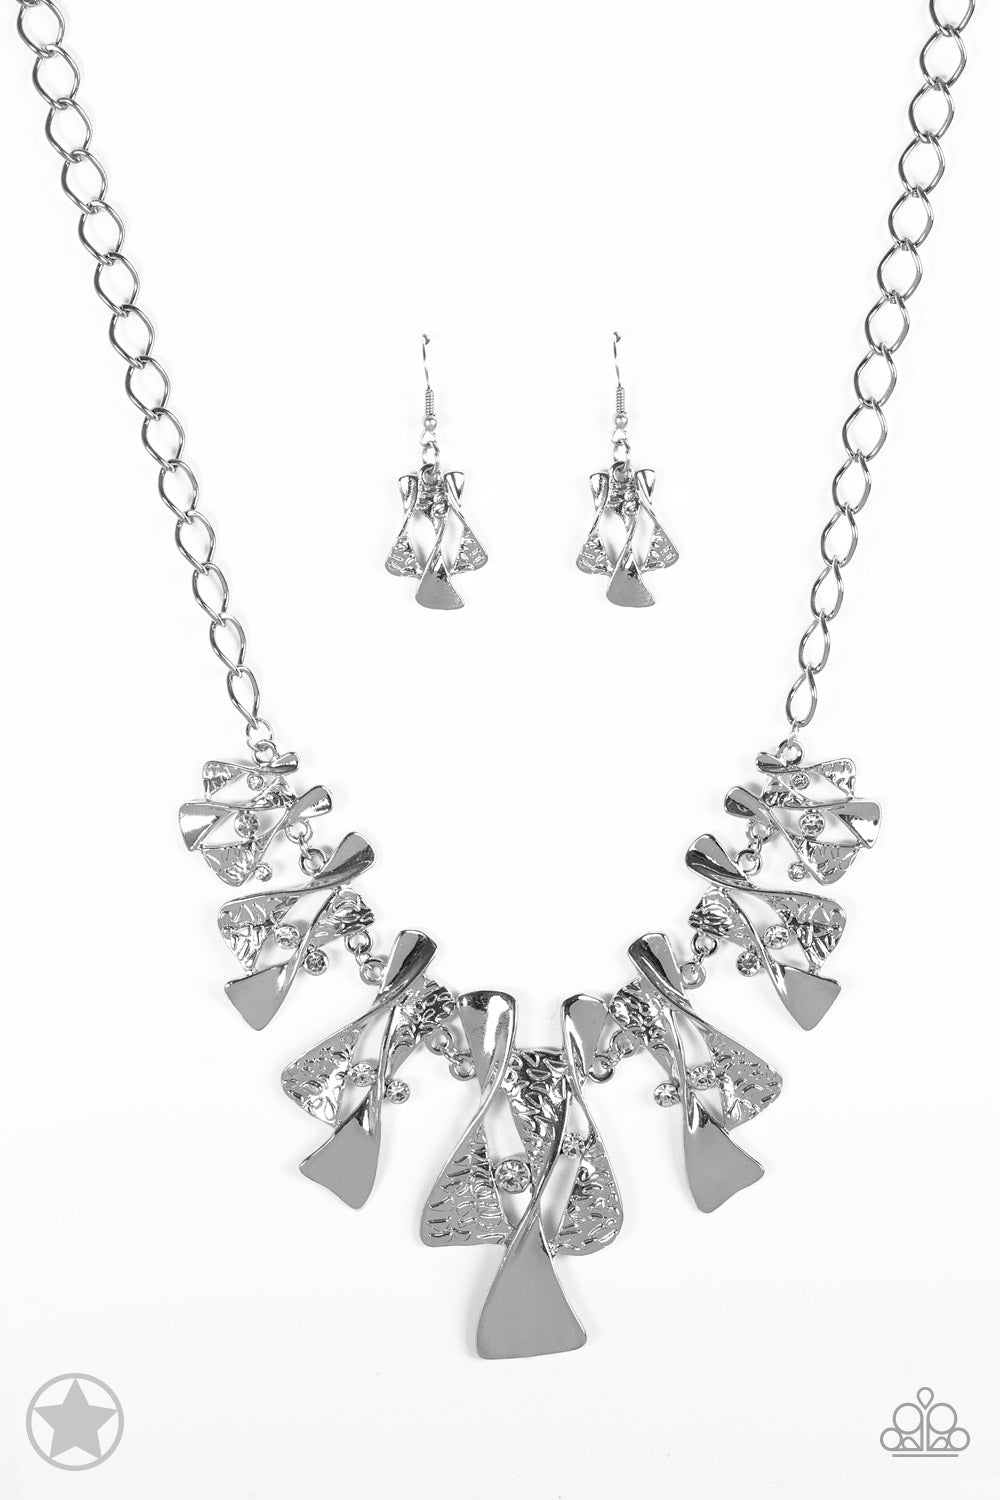 The Sands of Time Silver Blockbuster Necklace - Paparazzi Accessories - jazzy-jewels-gems